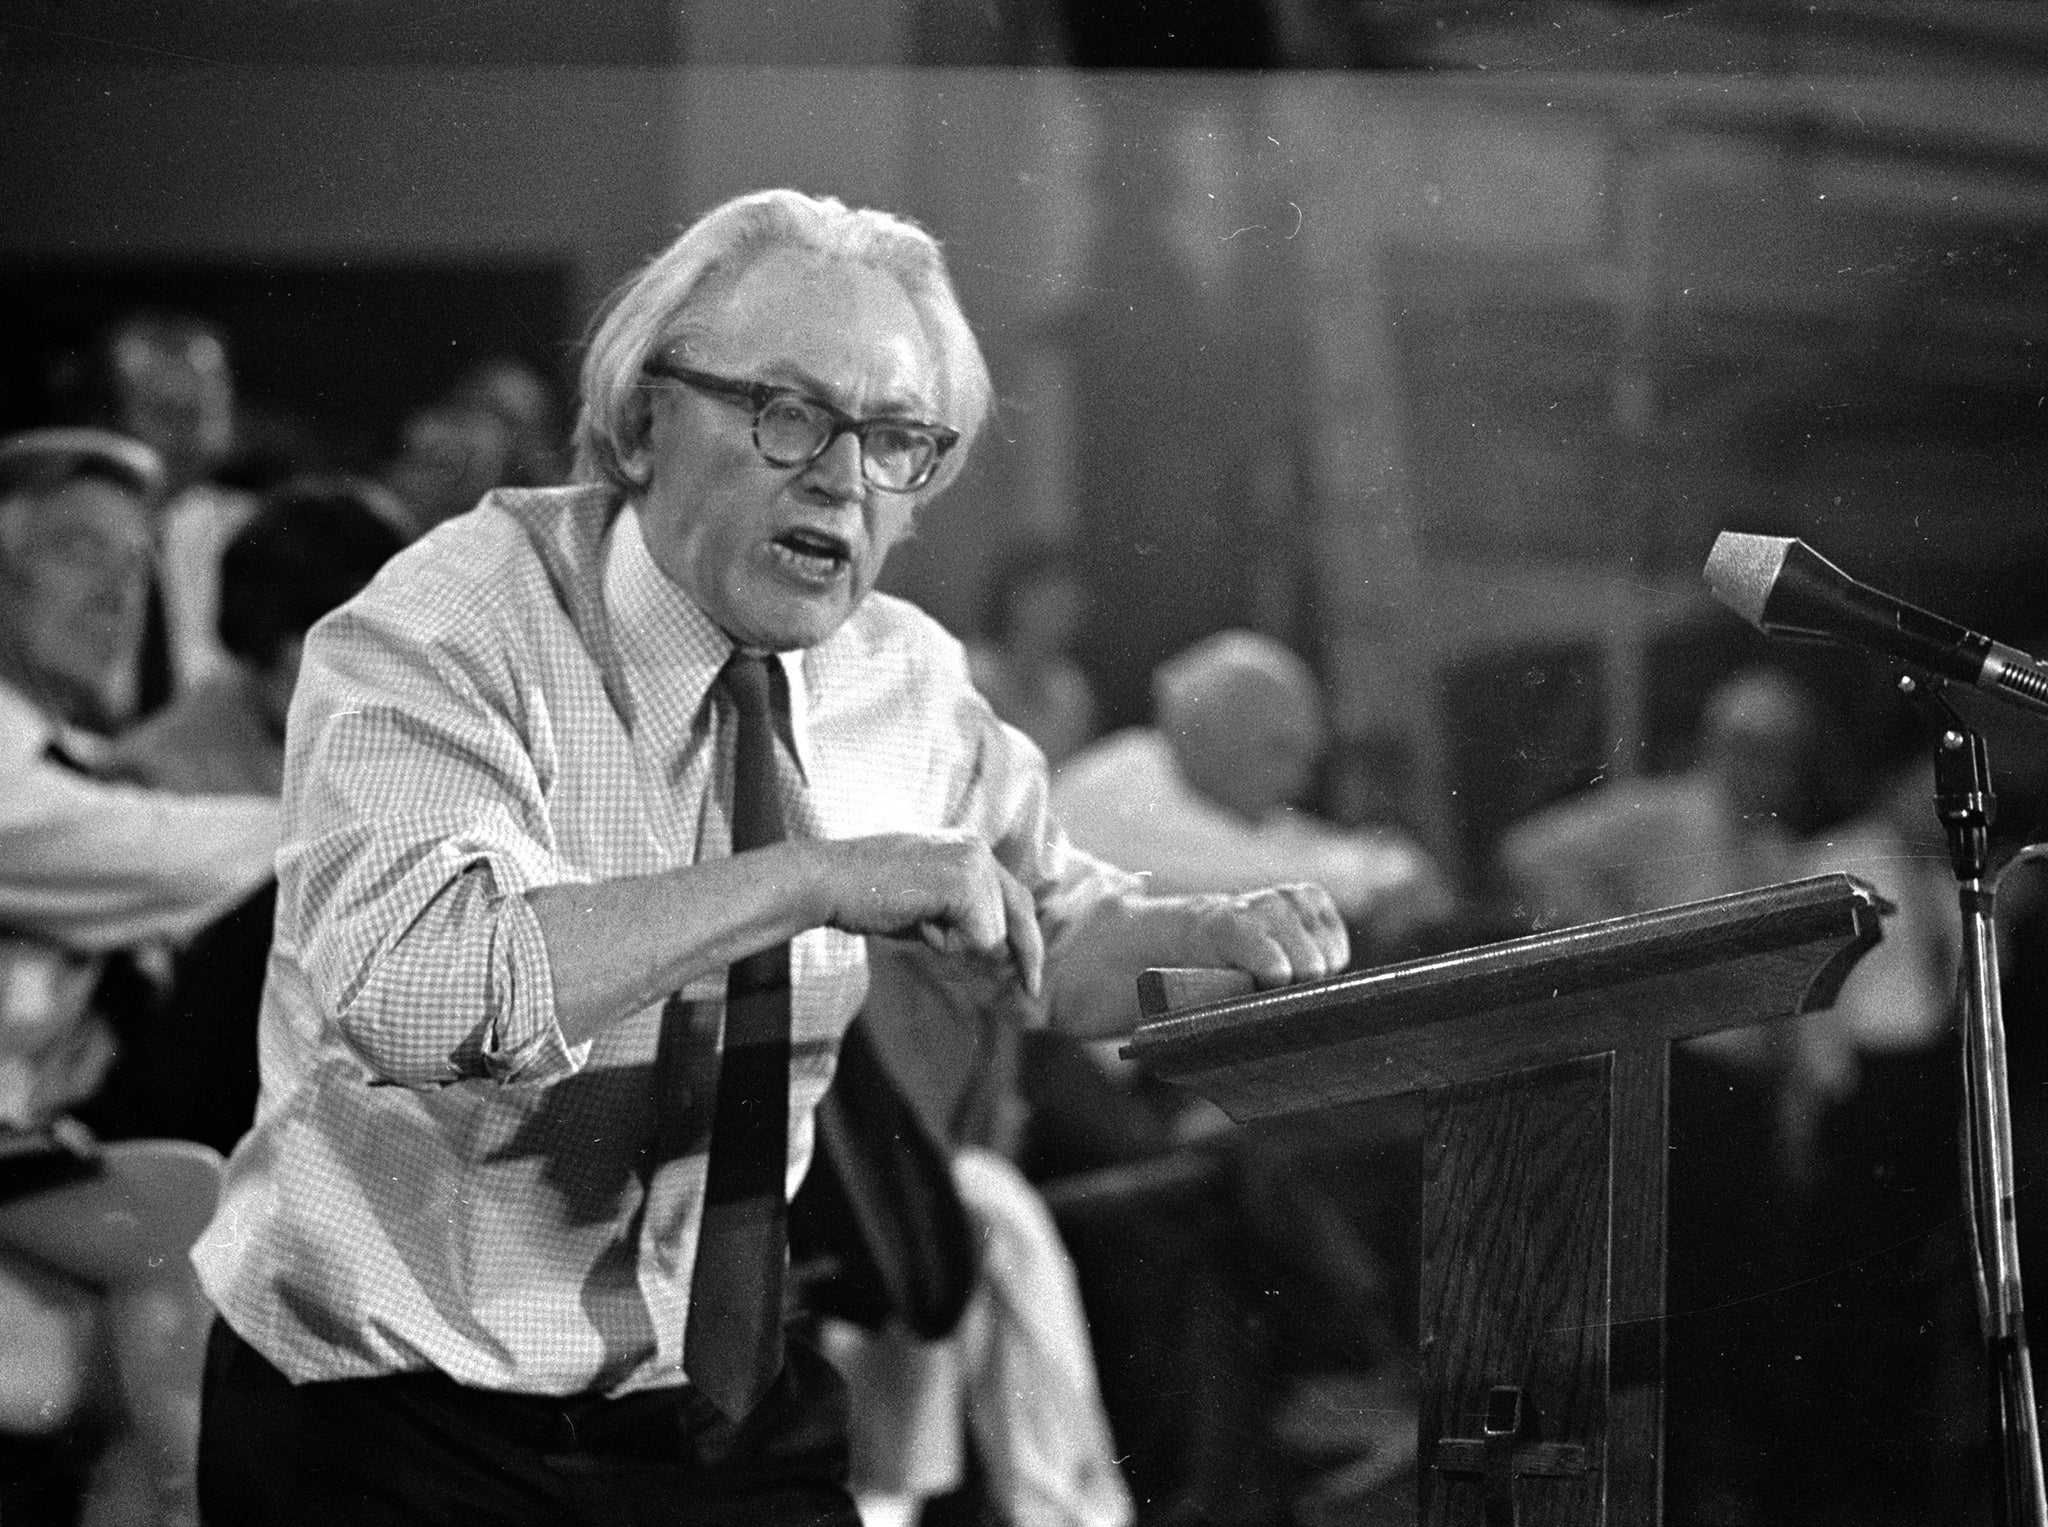 Michael Foot MP speaking at a podium in 1972